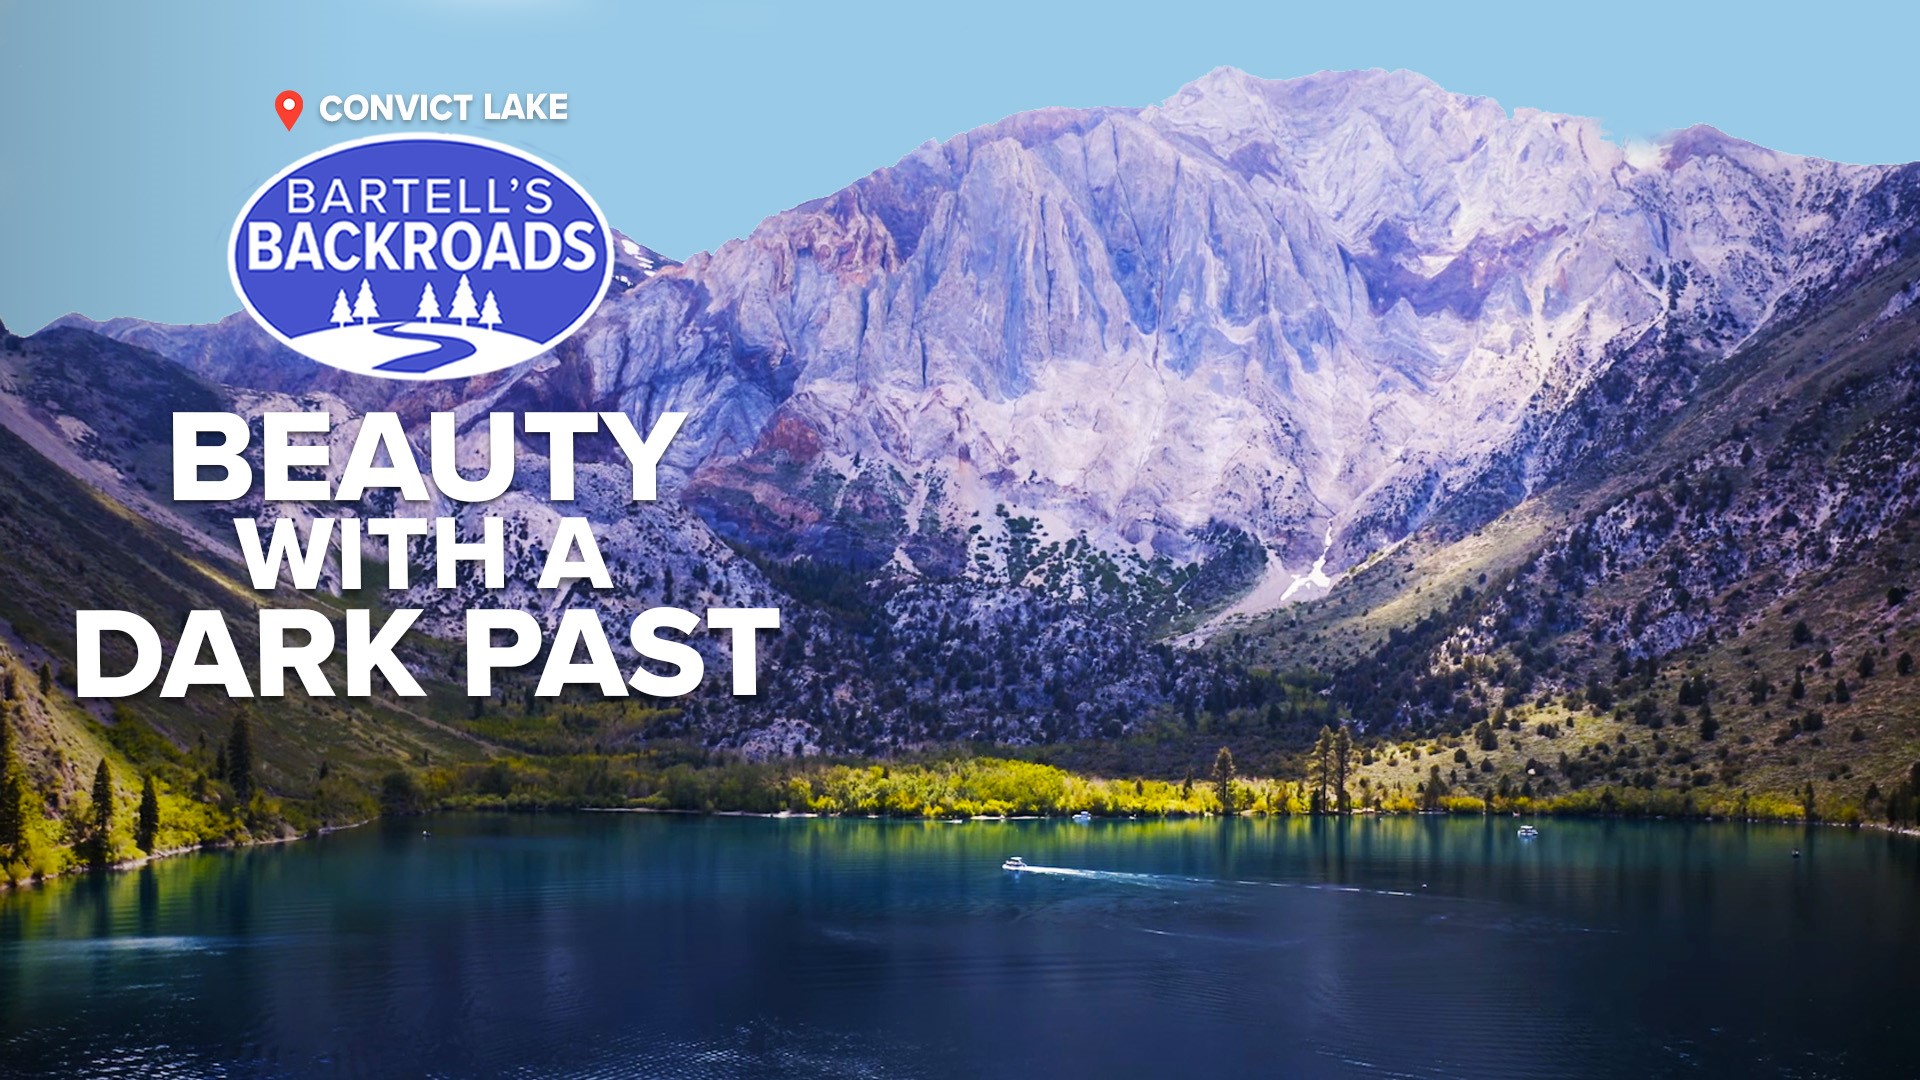 Convict Lake has a history of great views, great fishing and a murderous shootout.